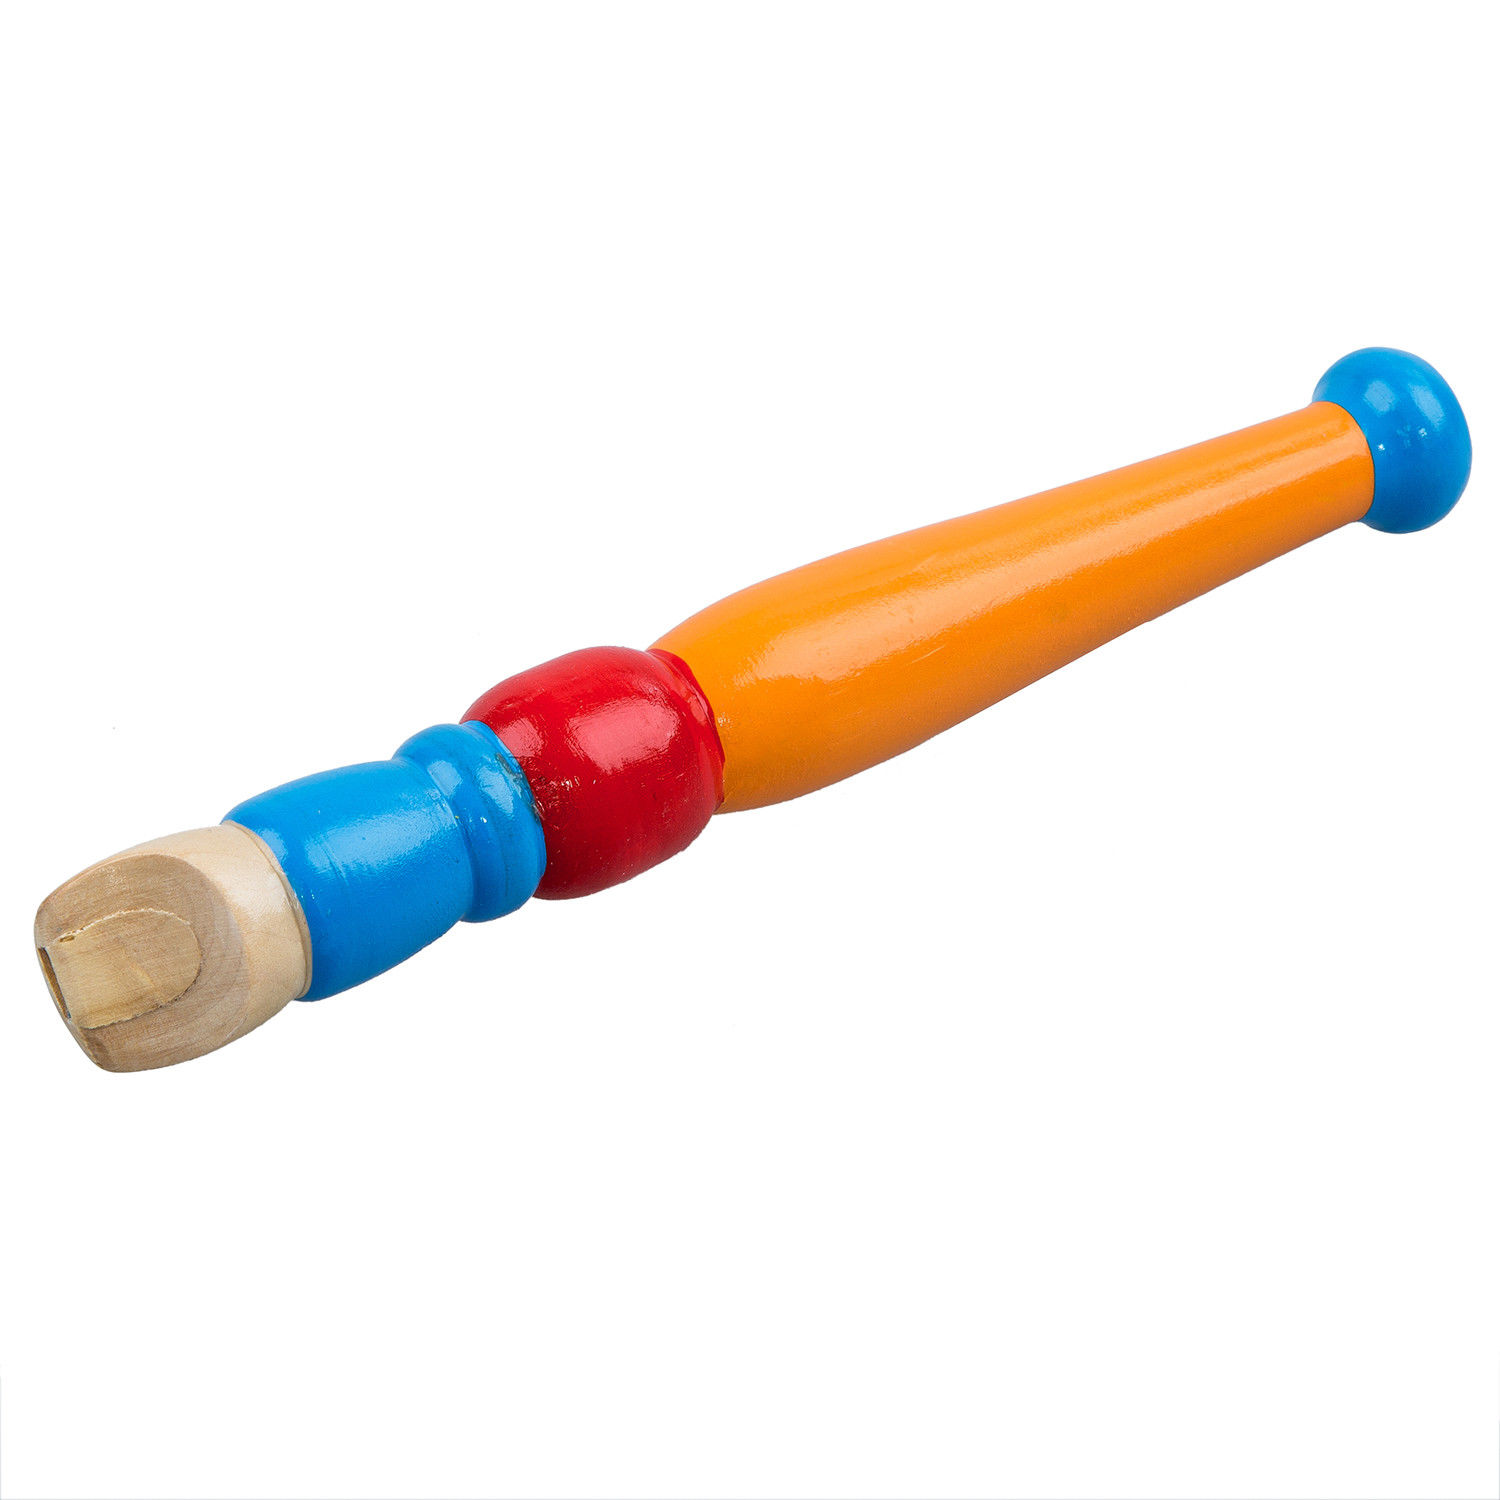 1x Wooden Flute Toy Kids Music Educational Toy Random Color S2u2ge ...